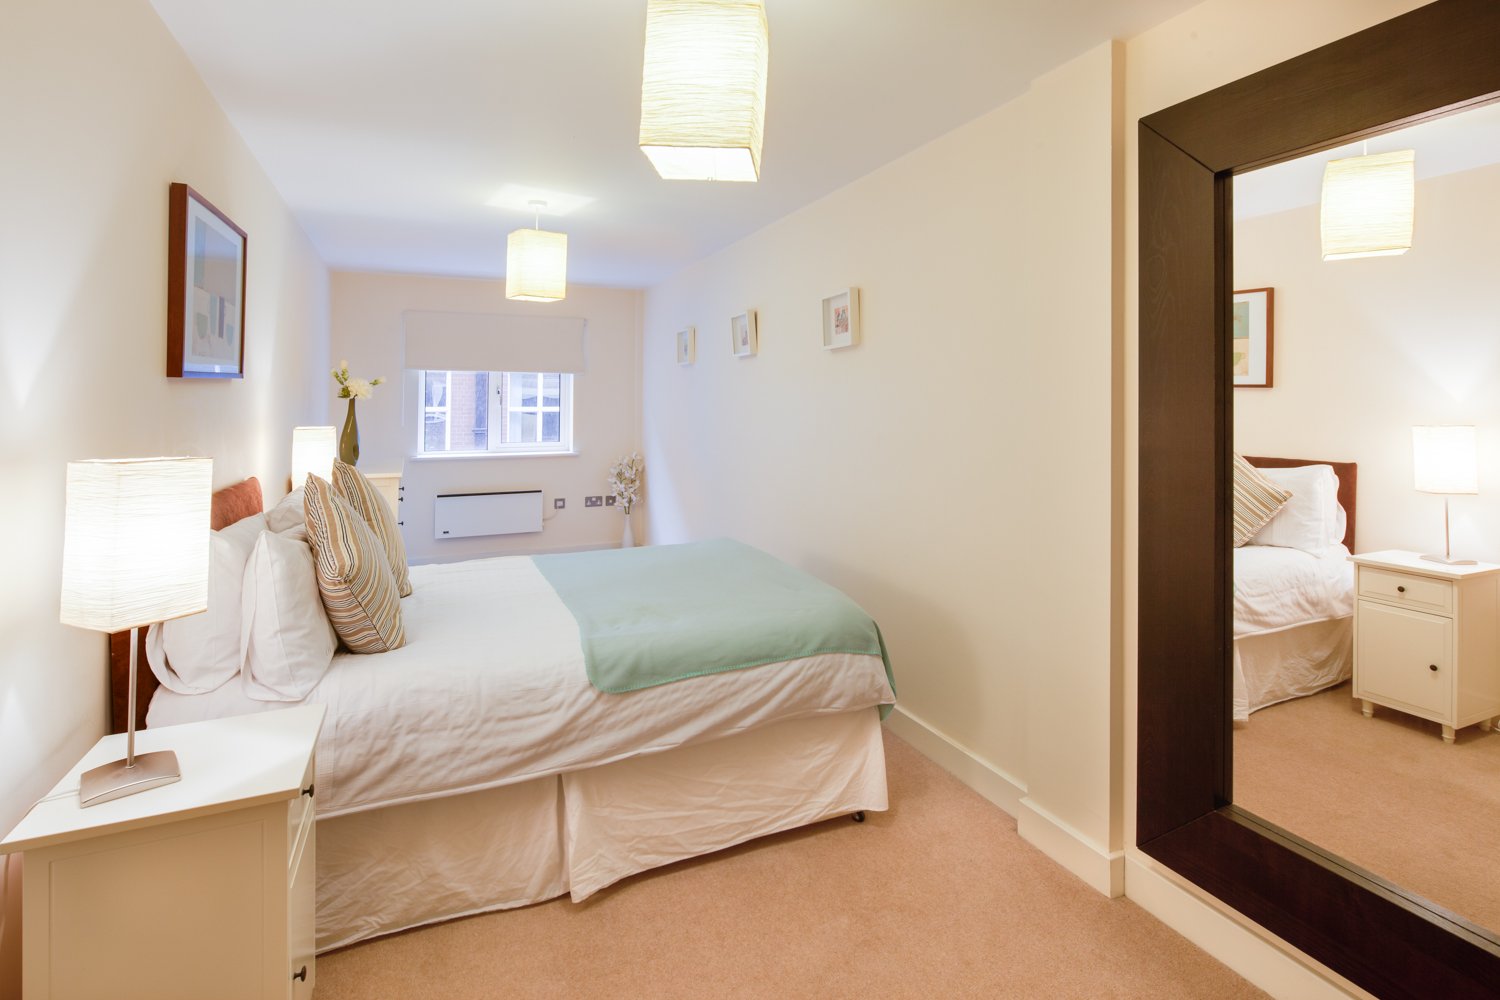 Looking-for-Corporate-Short-Let-Apartments-in-East-Midlands?-Book-Serviced-Accommodation-Leicester-UK-Now-for-low-rates---cheaper-than-a-Hotel-+-Free-Wifi!-Urban-Stay